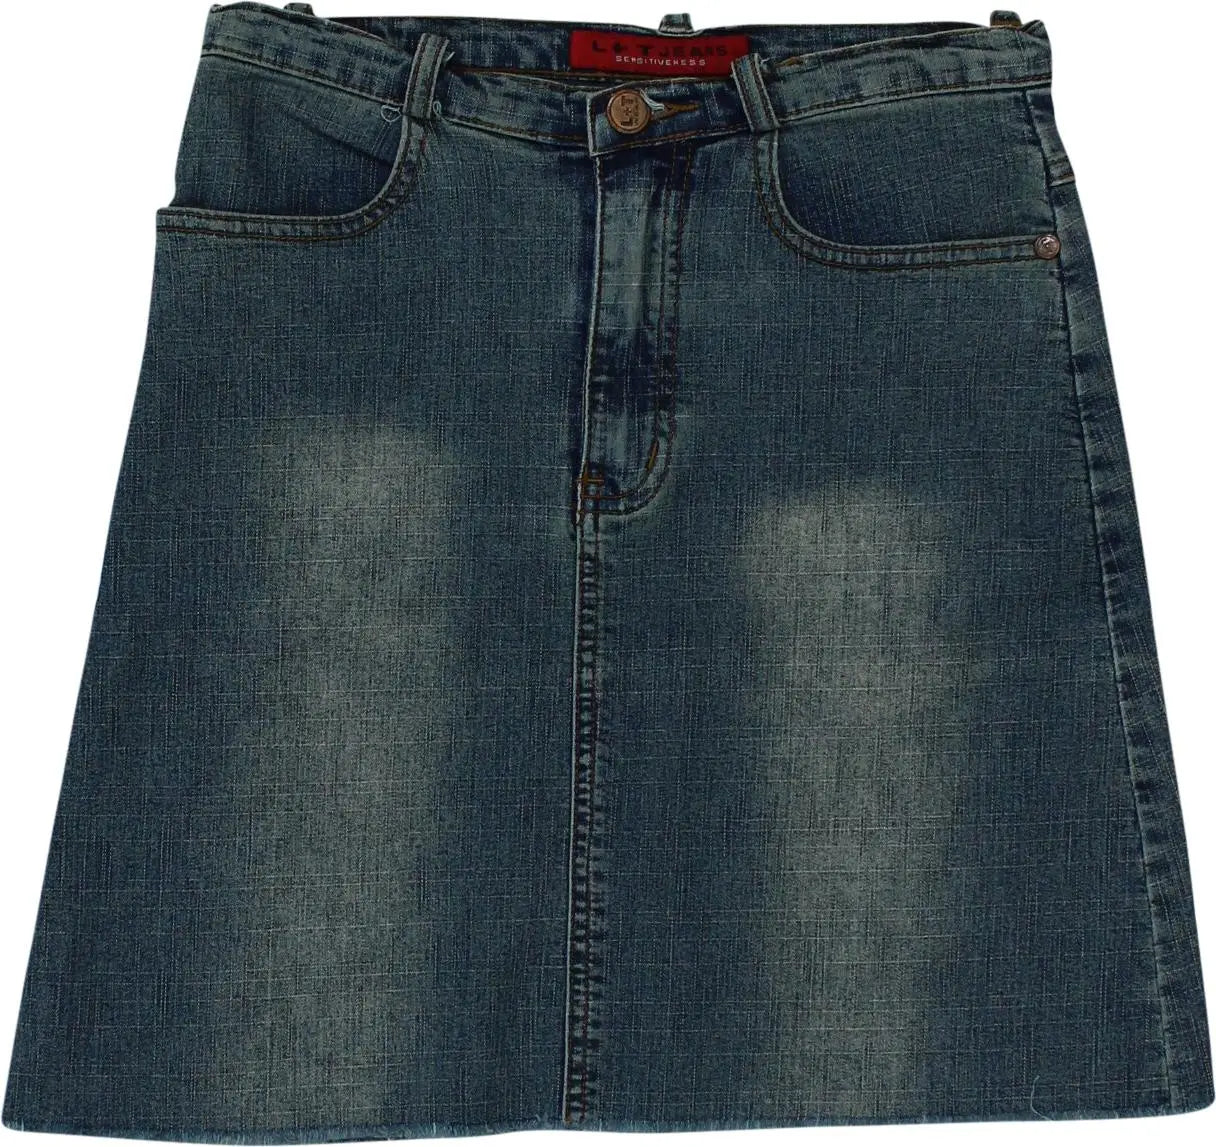 L+T Jeans - Blue Denim Skirt With Corduroy Pockets- ThriftTale.com - Vintage and second handclothing